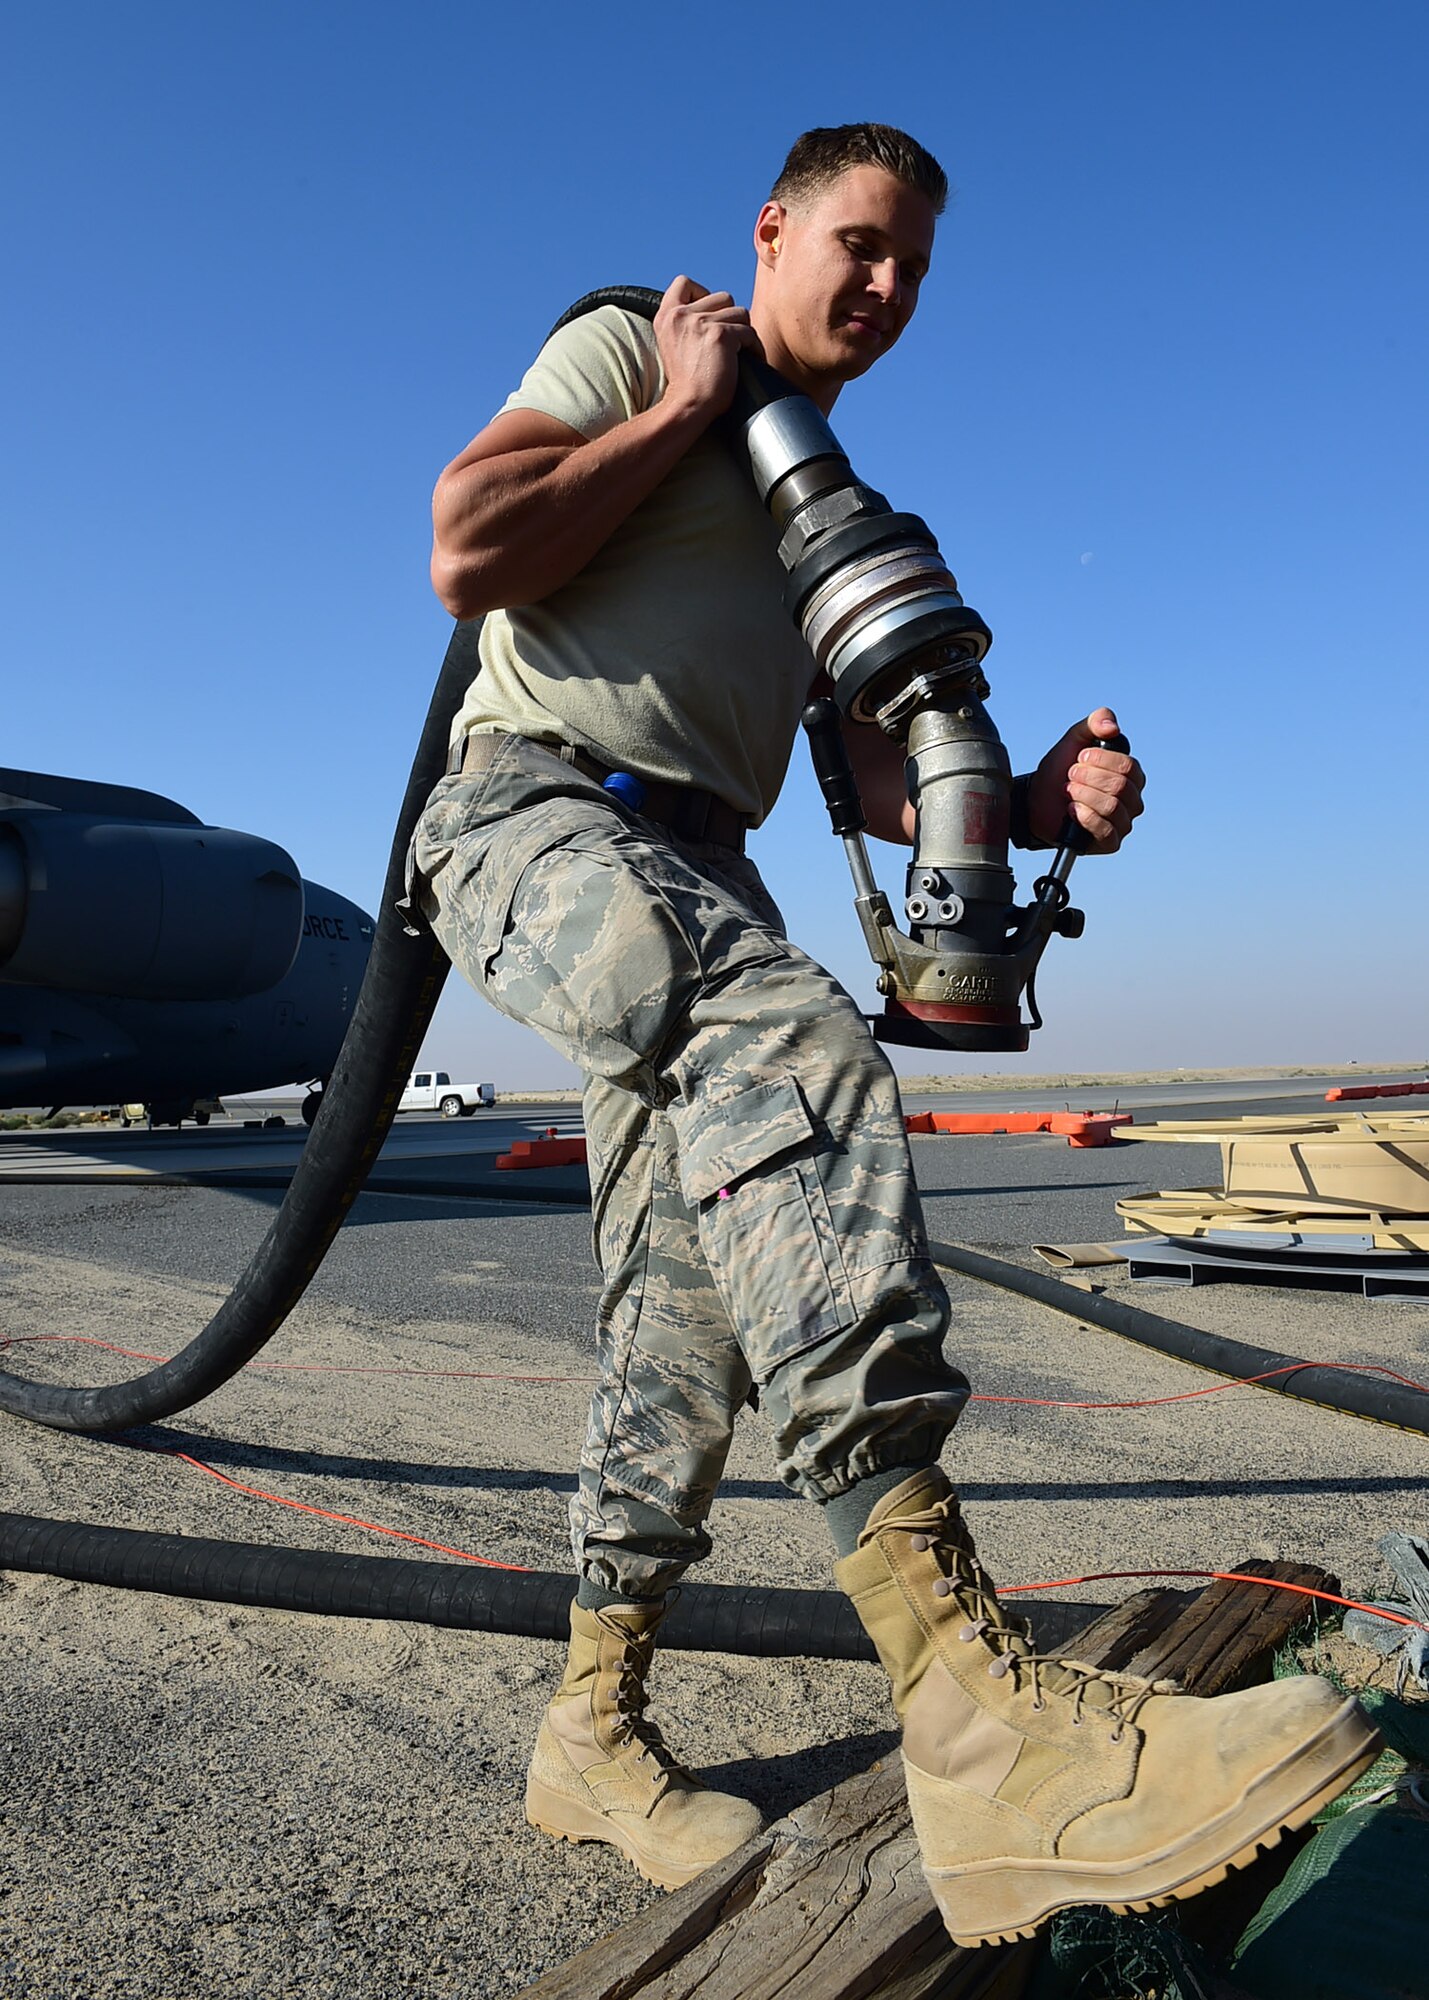 Airman Tyler Normandin, a 386th Expeditionary Logistics Readiness Squadron fuels distribution operator, returns an R-20 multi-servicing platform servicing hose on the flightline at an undisclosed location in Southwest Asia, Dec. 1, 2015. The platform is a stationary fuel servicing system capable of providing thousands of gallons of fuel to larger aircraft such as the C-17 and C-130 with ease. (U.S. Air Force photo by Staff Sgt. Jerilyn Quintanilla)